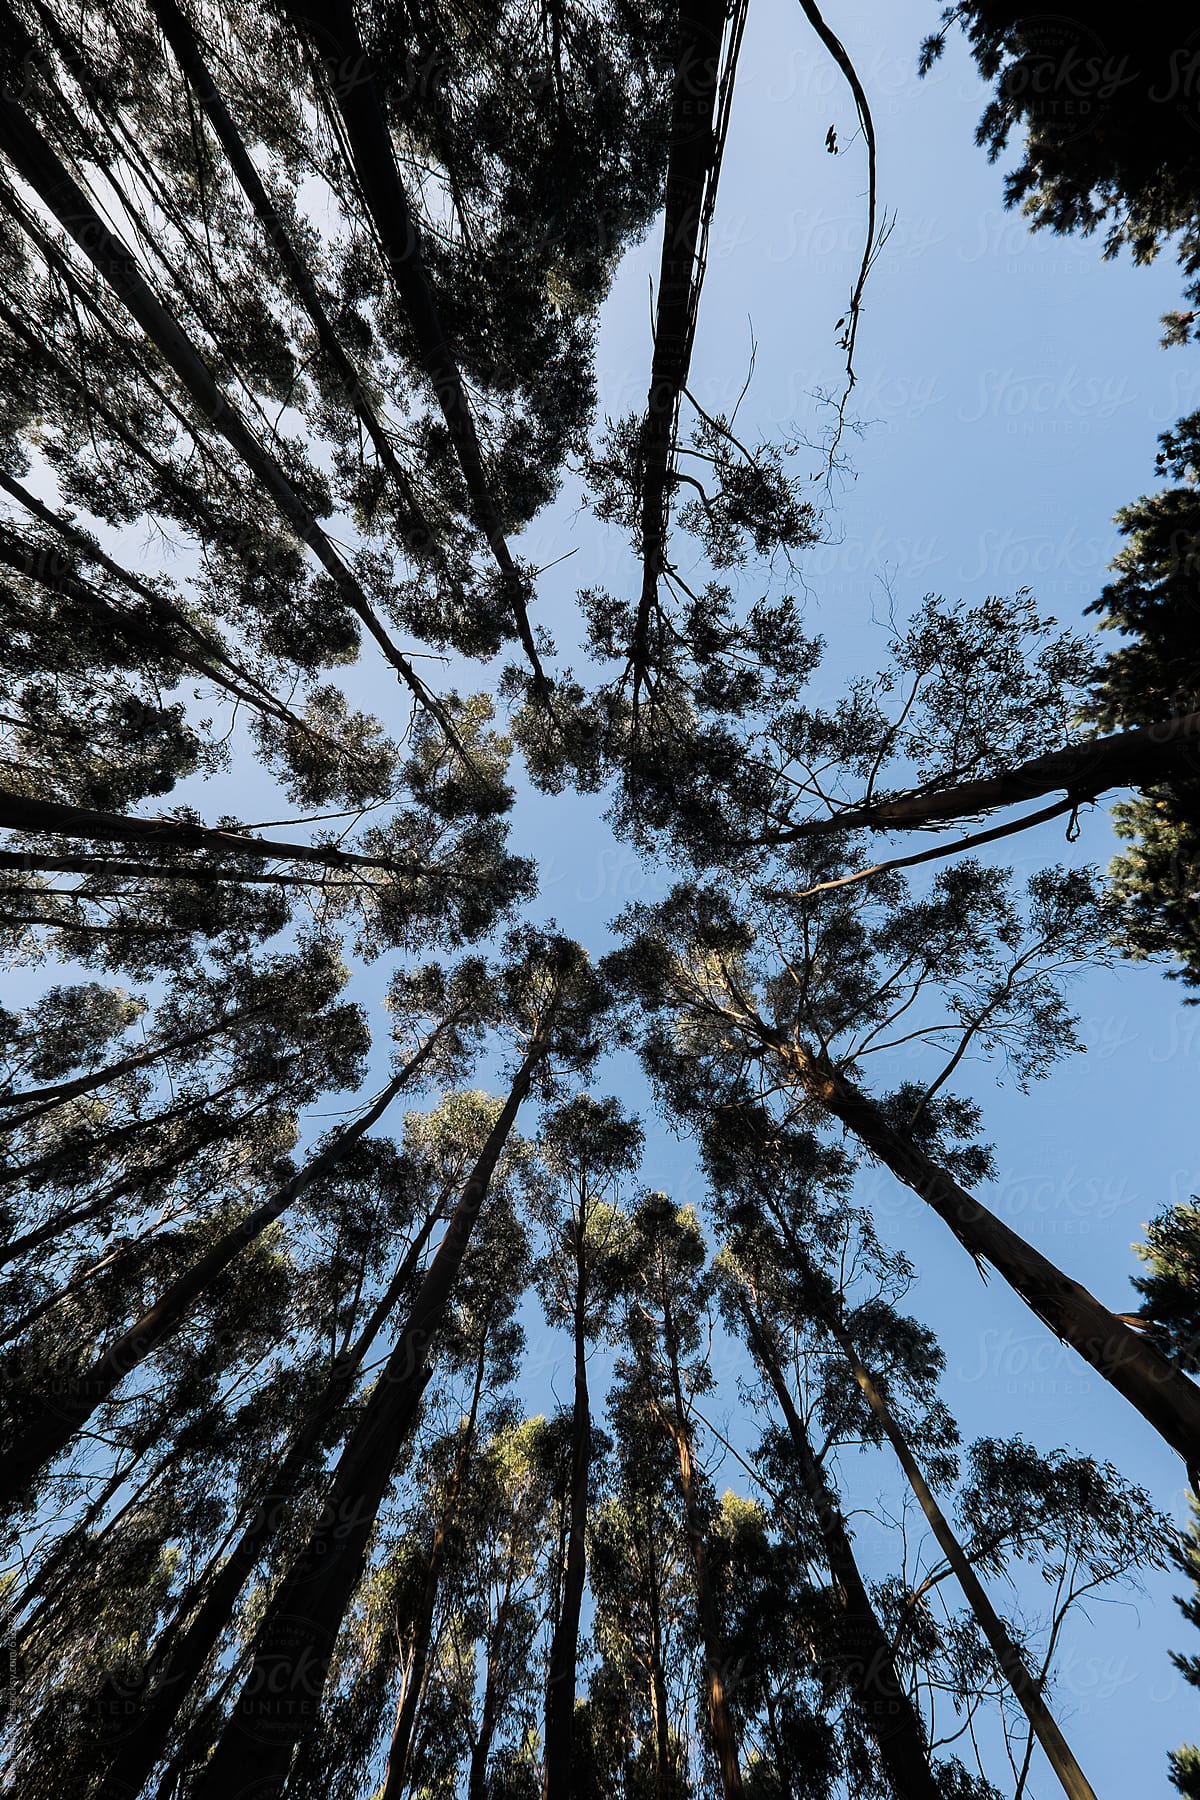 Looking up amongst the tall trees in a Blue Gum Plantation